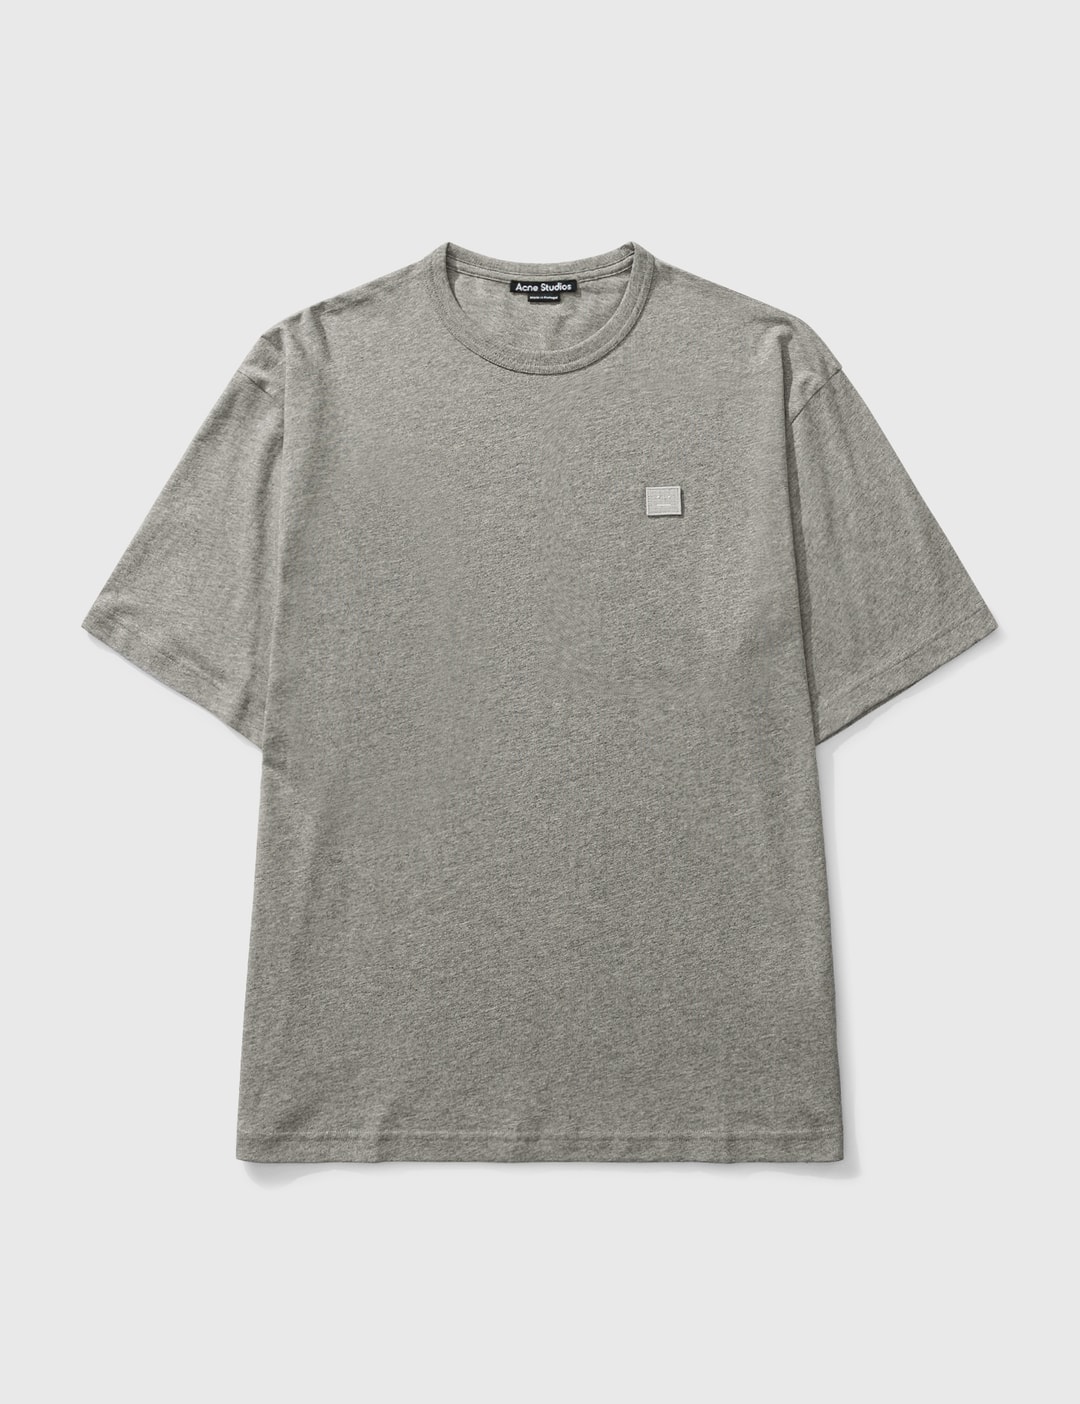 Cordelia se tv der ovre Acne Studios - Exford Face T-shirt | HBX - Globally Curated Fashion and  Lifestyle by Hypebeast